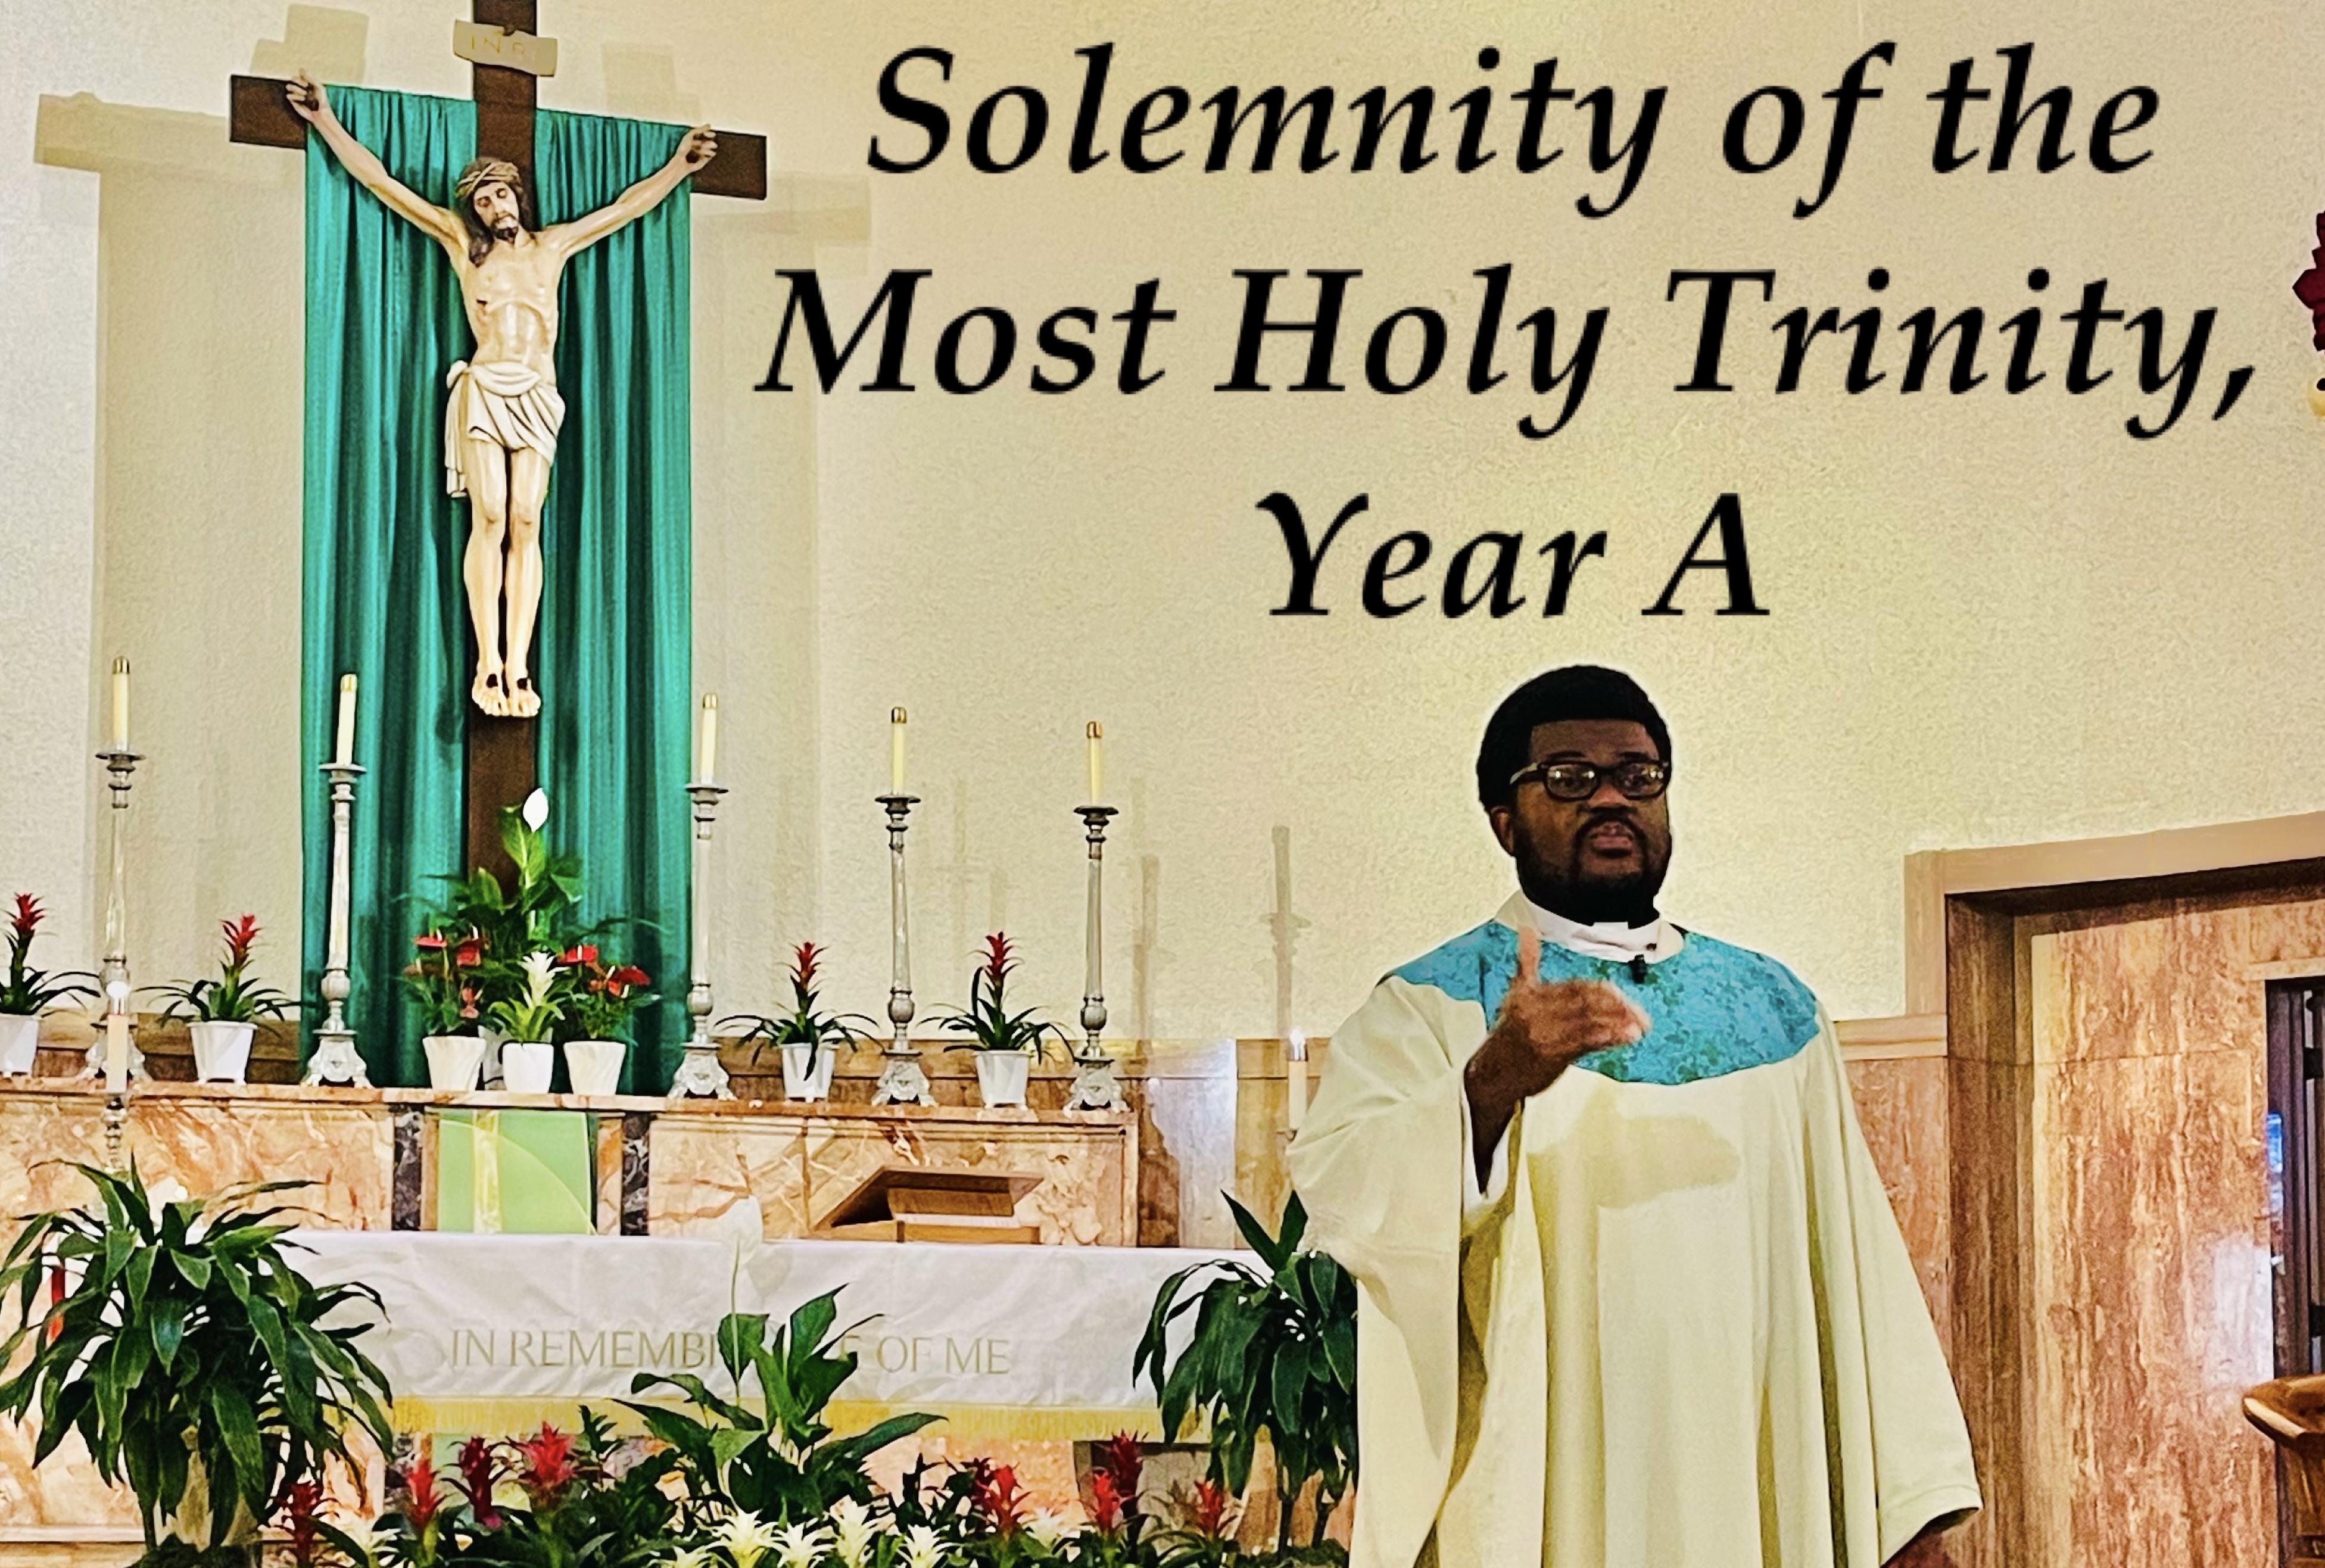 Solemnity of the Most Holy Trinity, Year A